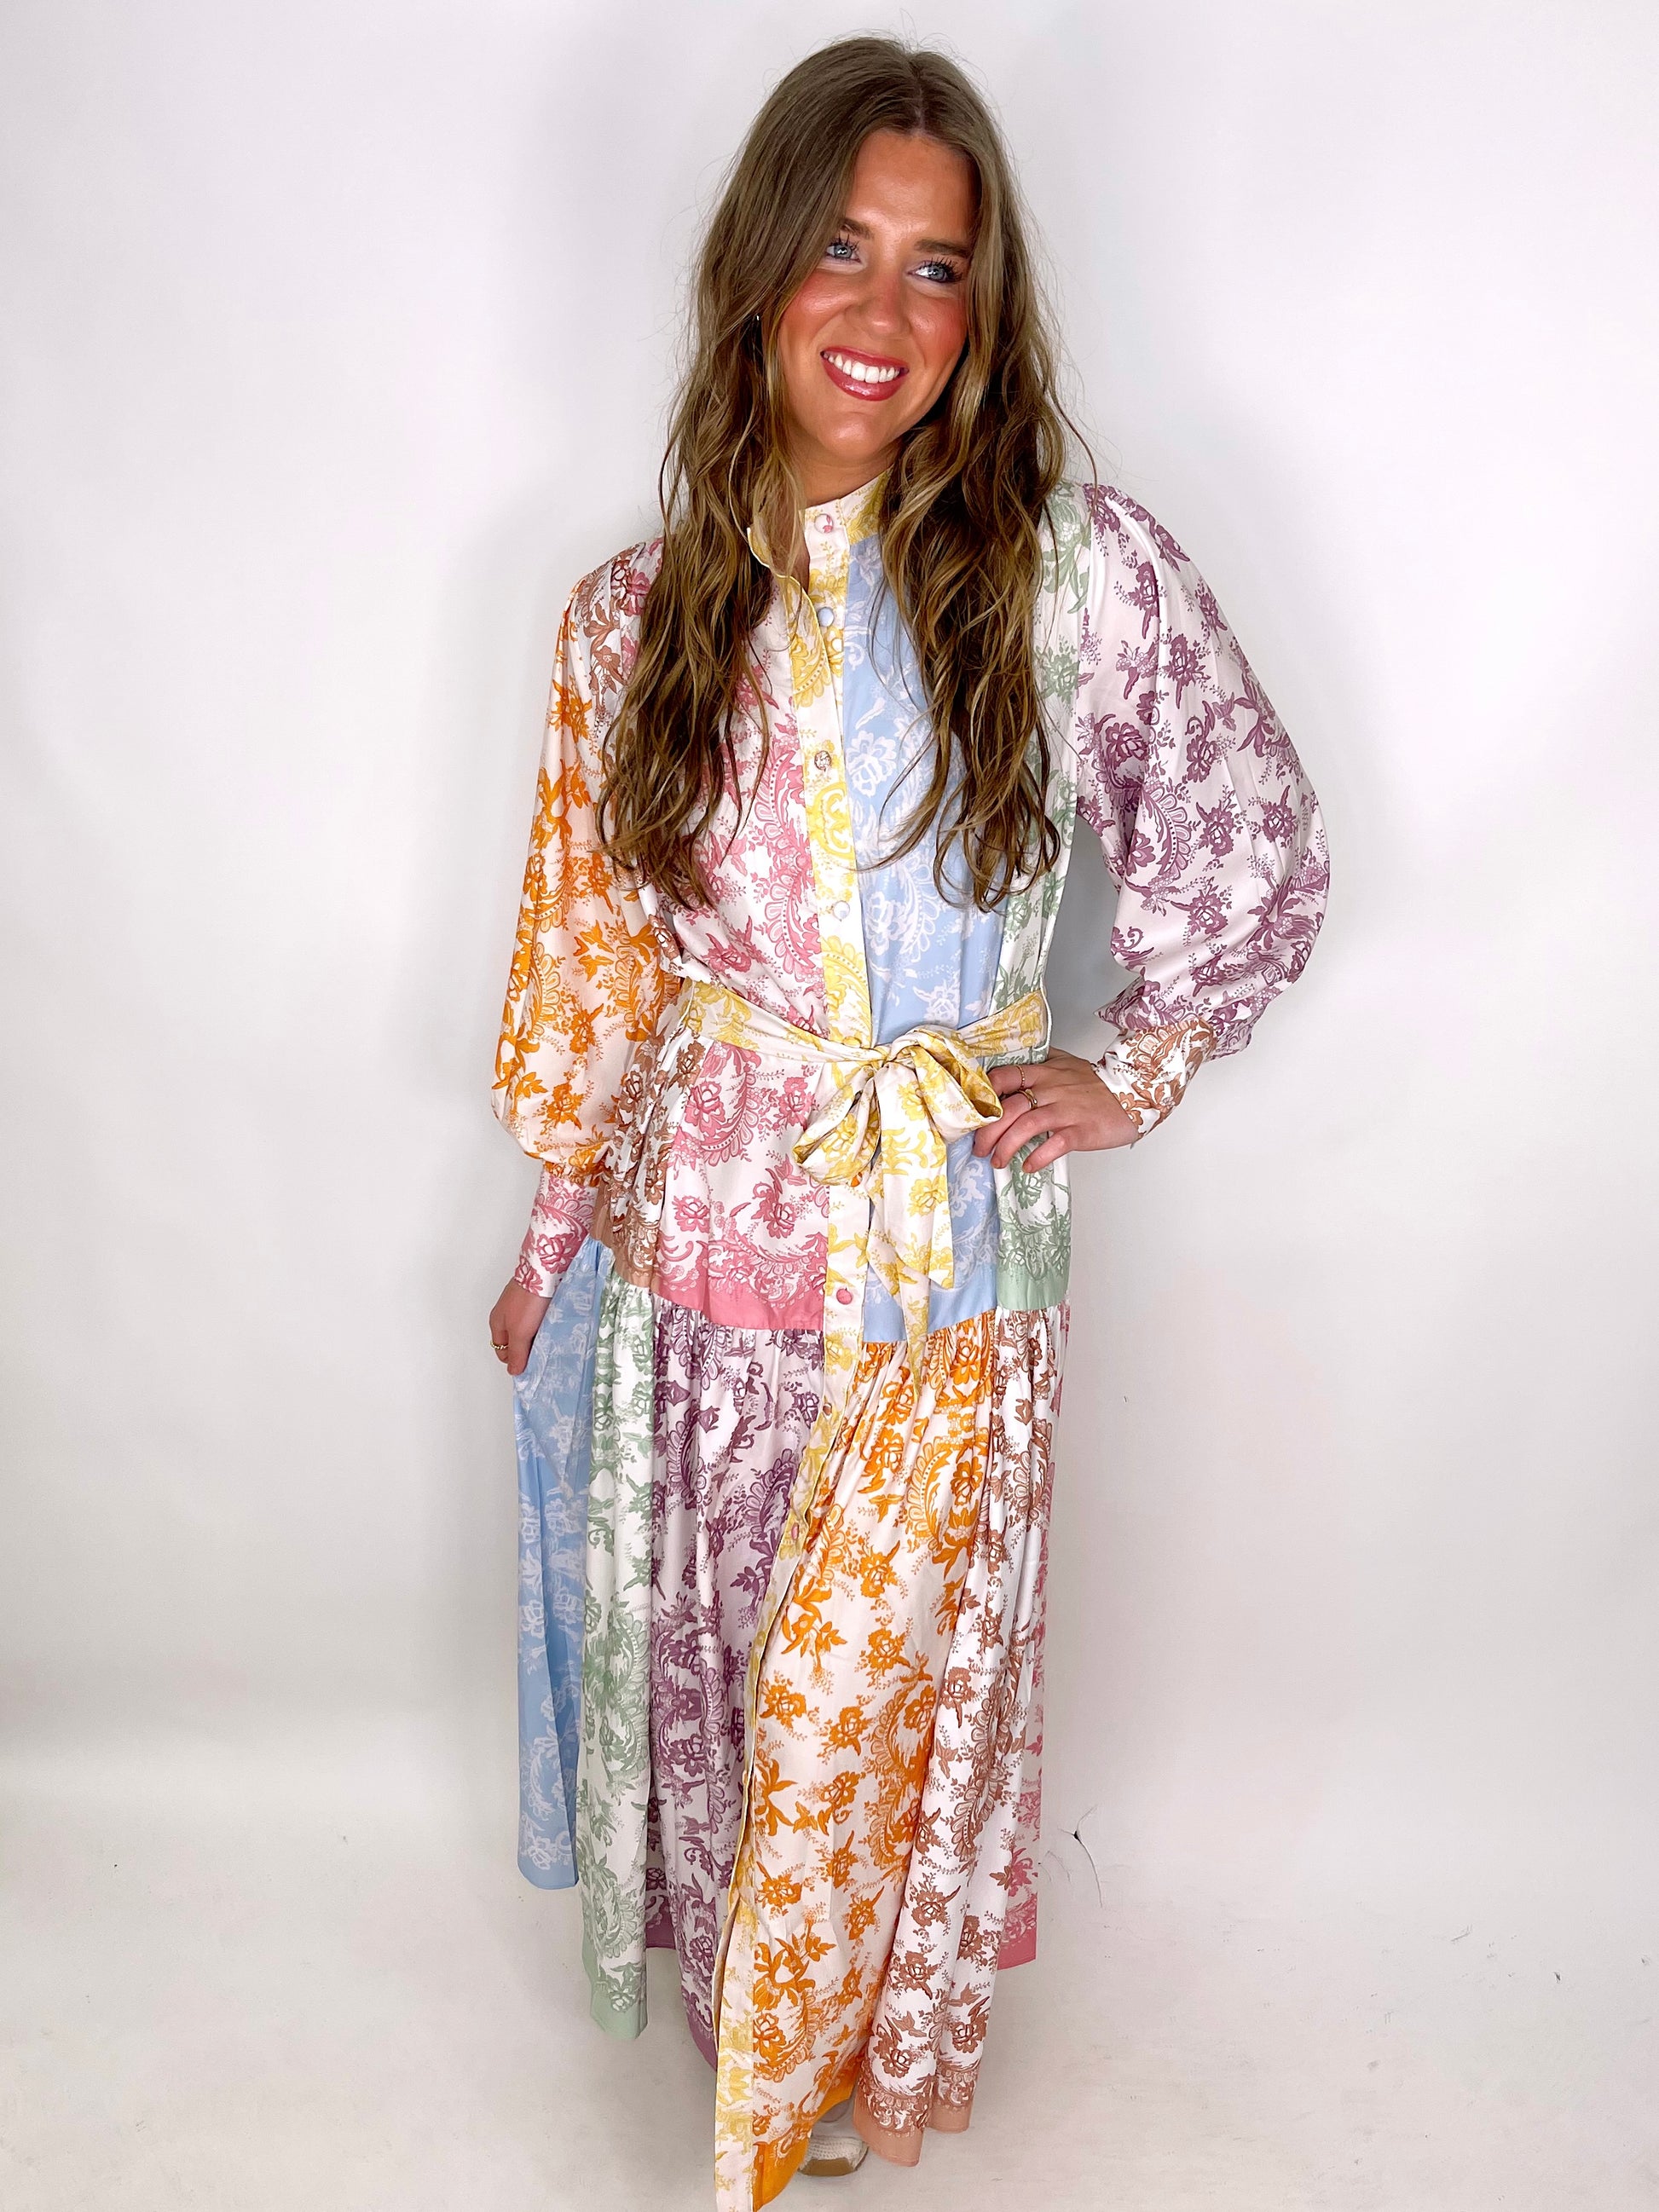 The Tucker Maxi Dress-Maxi Dress-J.nna-The Village Shoppe, Women’s Fashion Boutique, Shop Online and In Store - Located in Muscle Shoals, AL.